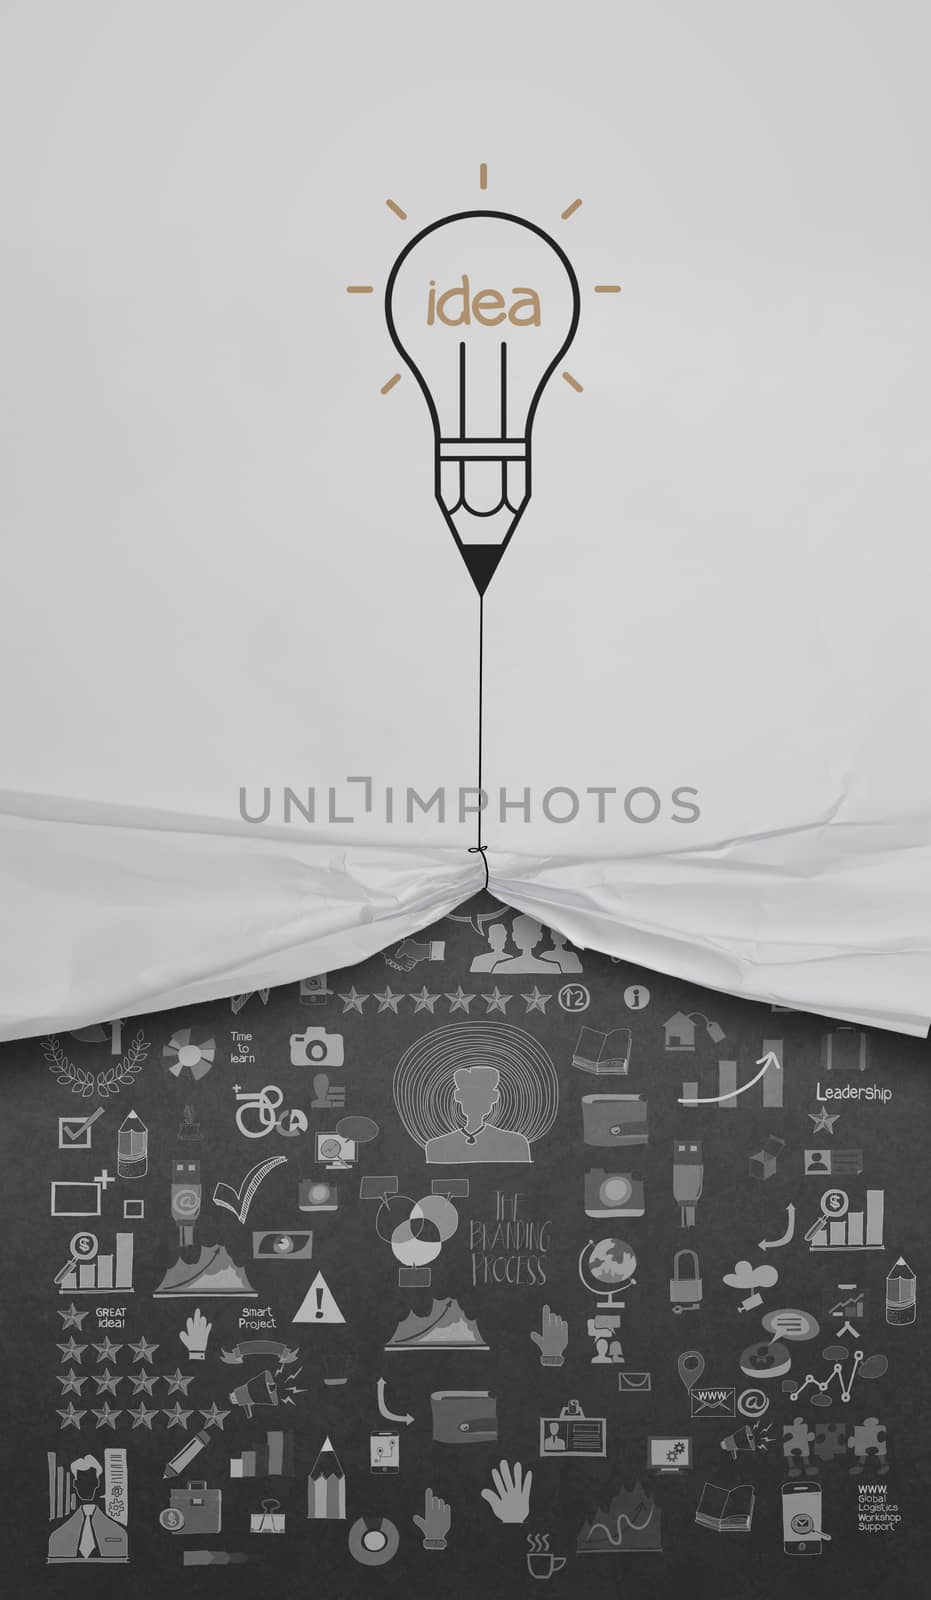 pencil lightbulb draw rope open wrinkled paper show business strategy as concept